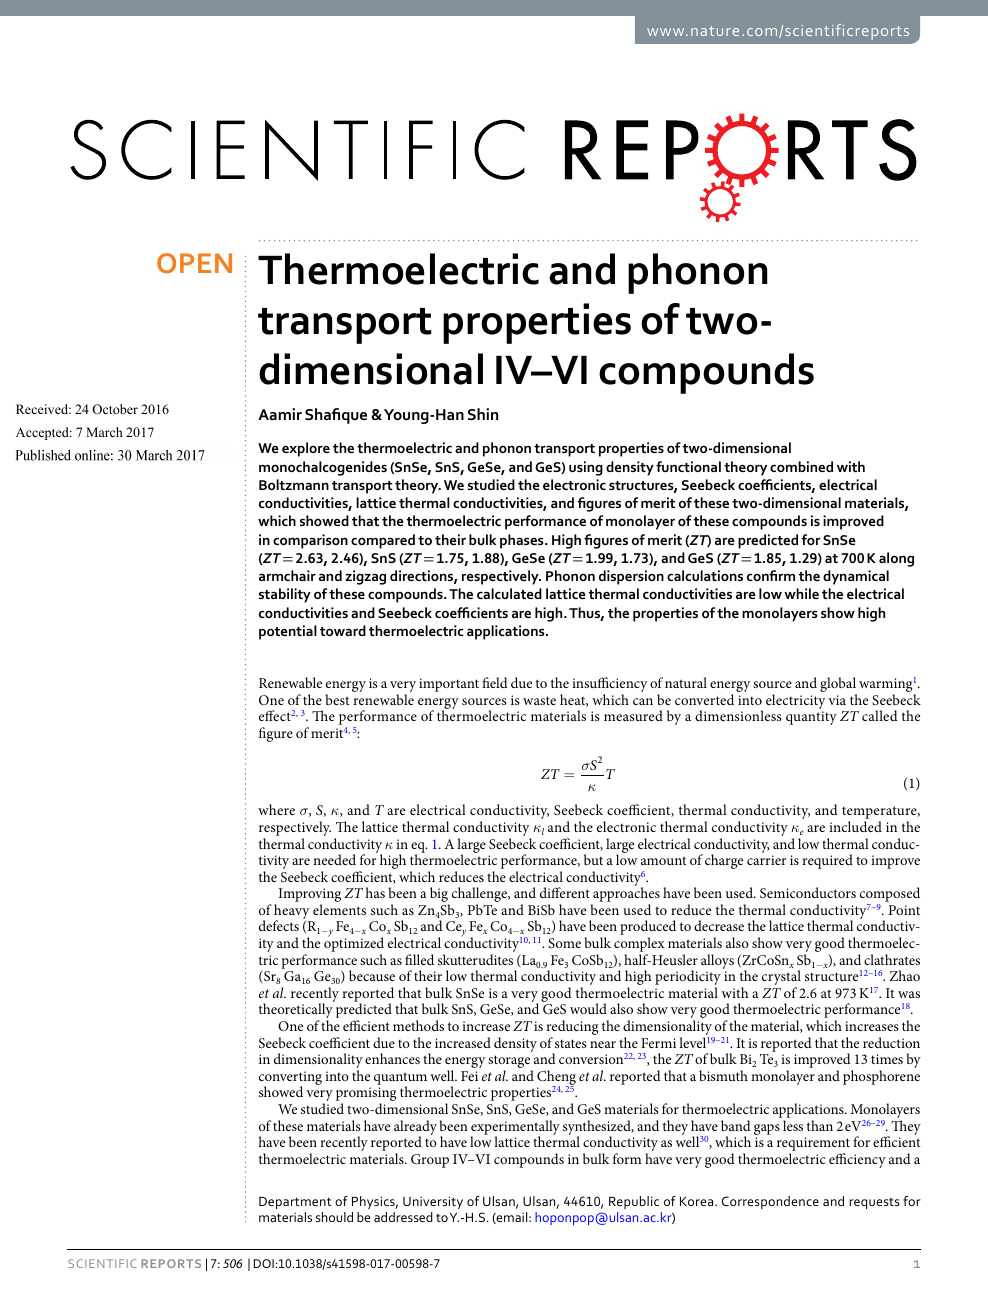 Thermoelectric and phonon transport properties of two-dimensional IV–VI compounds